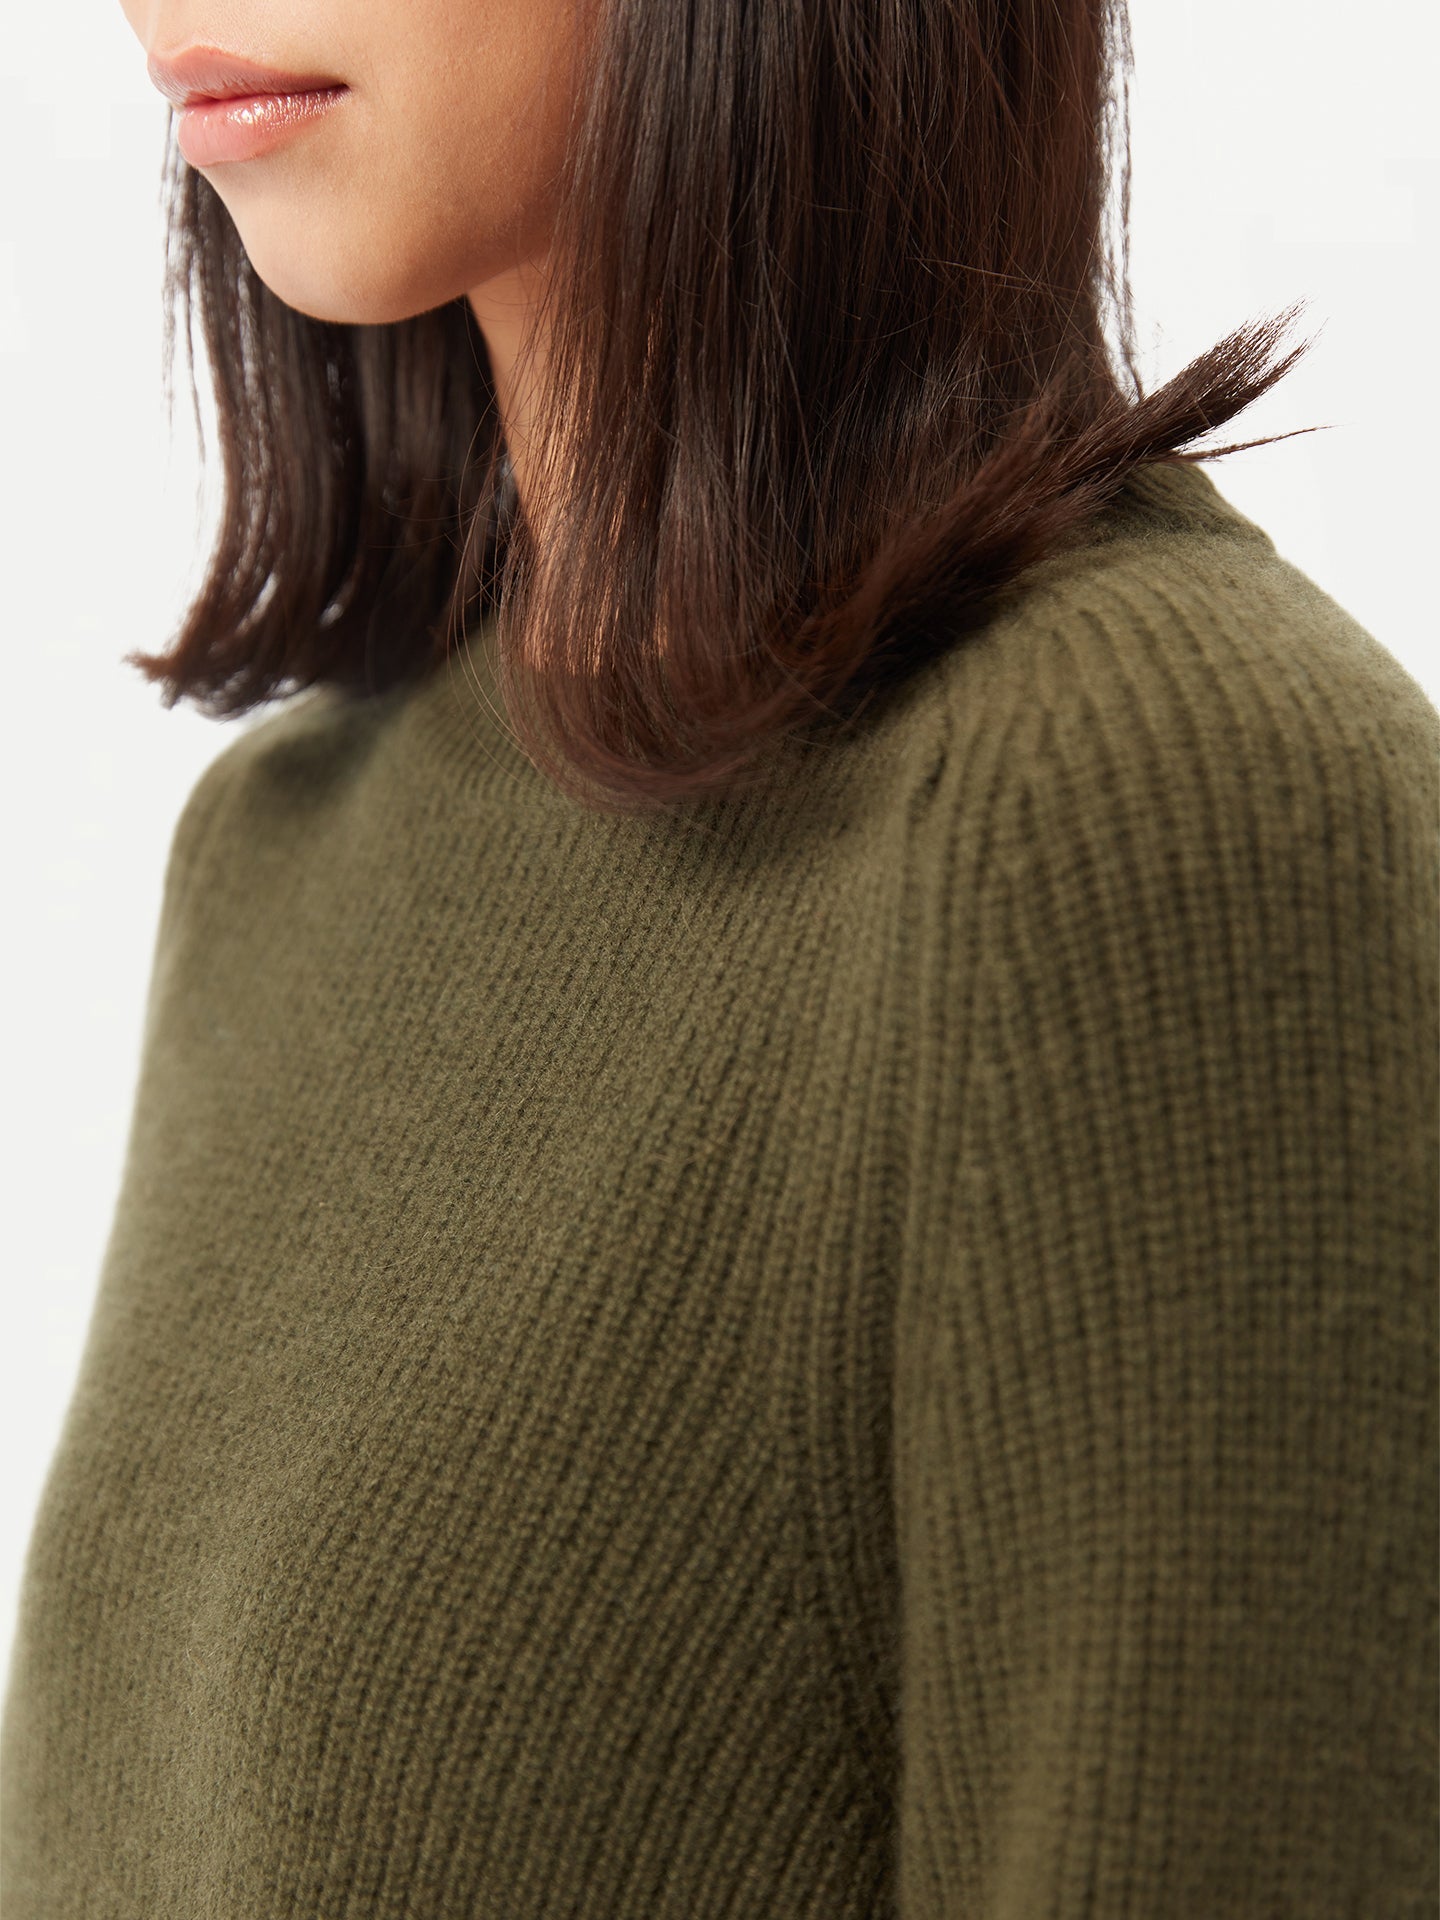 Women's Cashmere Sweater with Side Zippers Capulet Olive - Gobi Cashmere